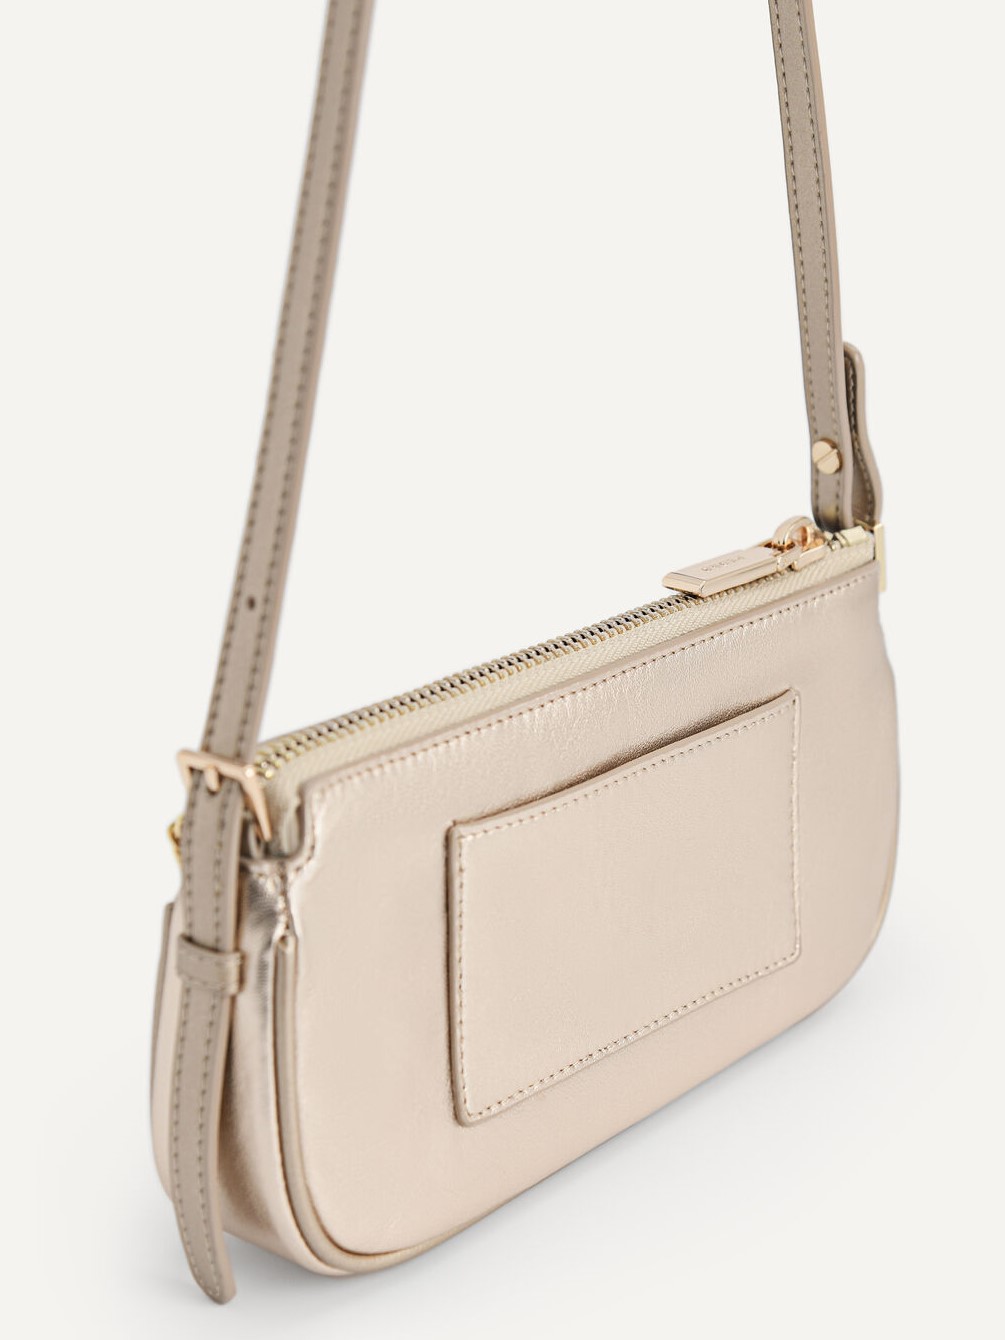 TÚI XÁCH PEDRO MADDY LEATHER CHAIN DETAILED SHOULDER BAG 8